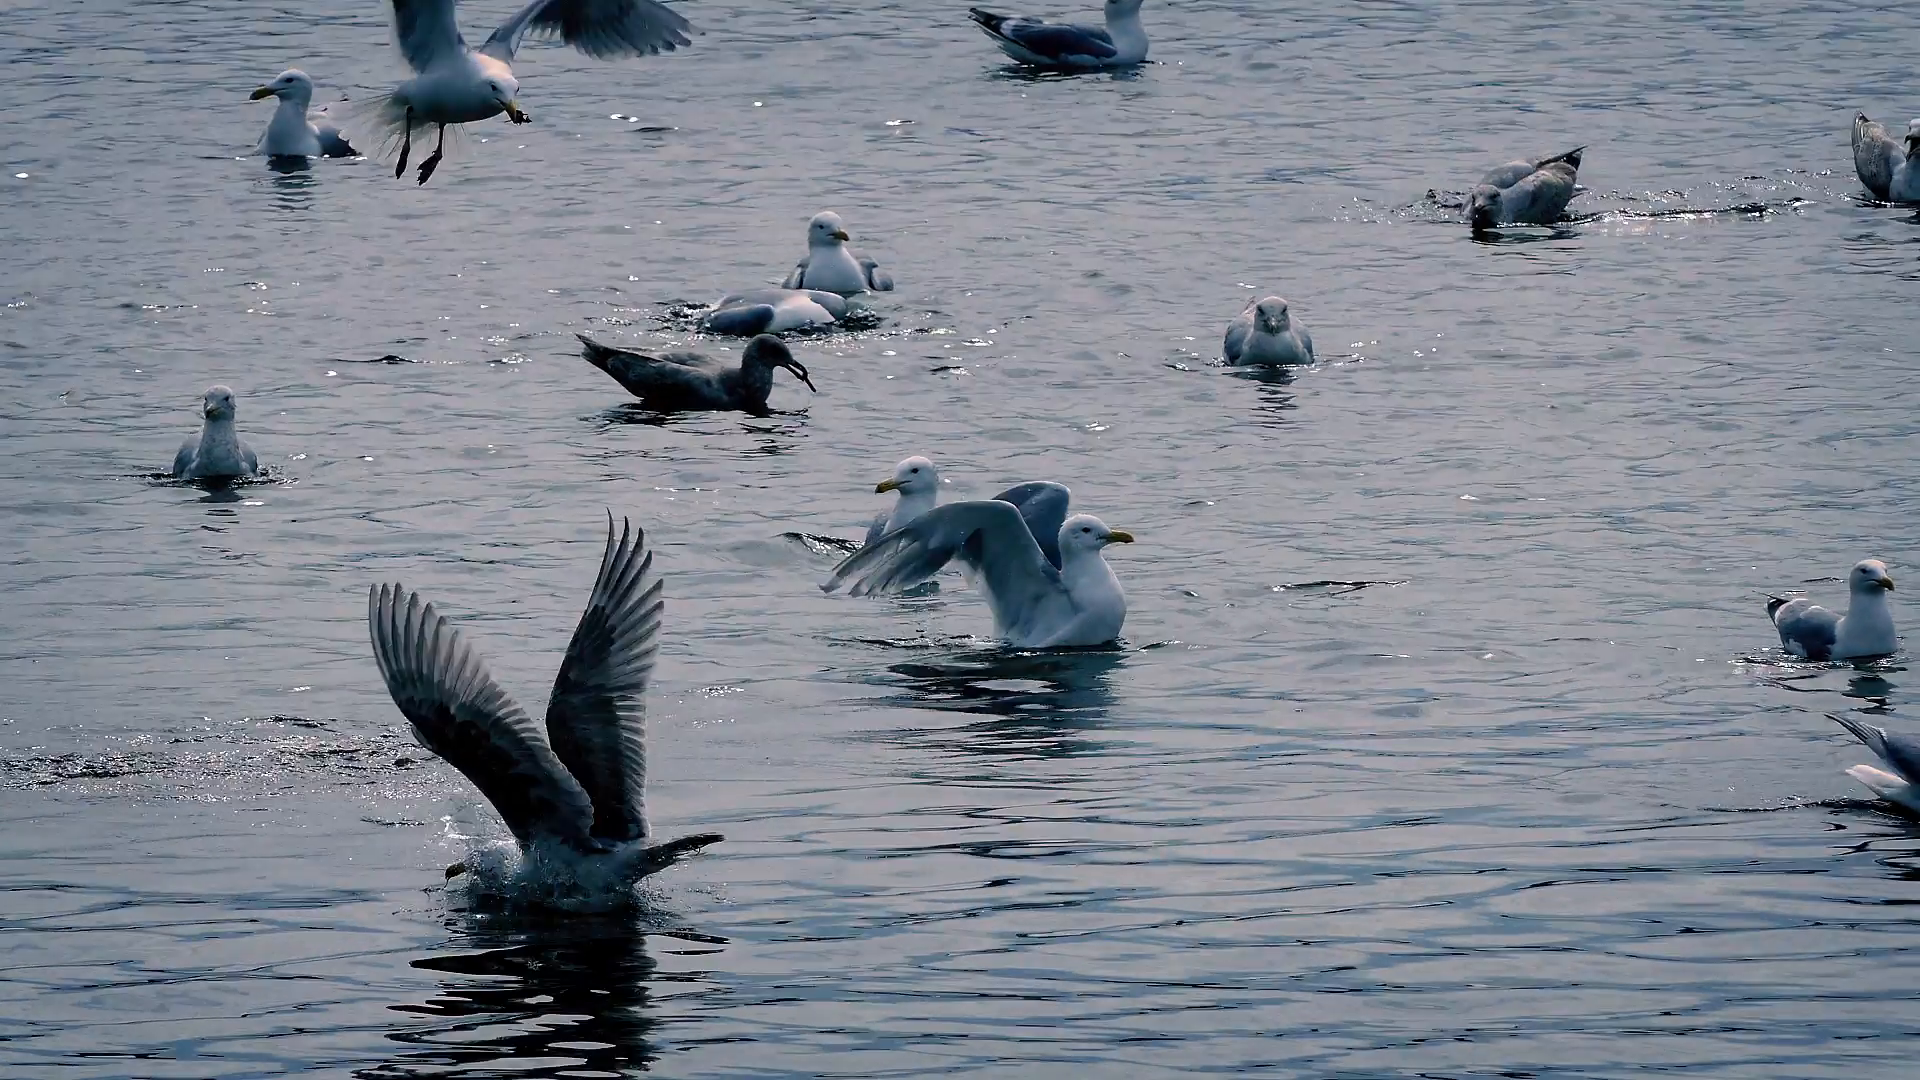 Seagulls Jostling For Food On The Water Stock Video Footage ...